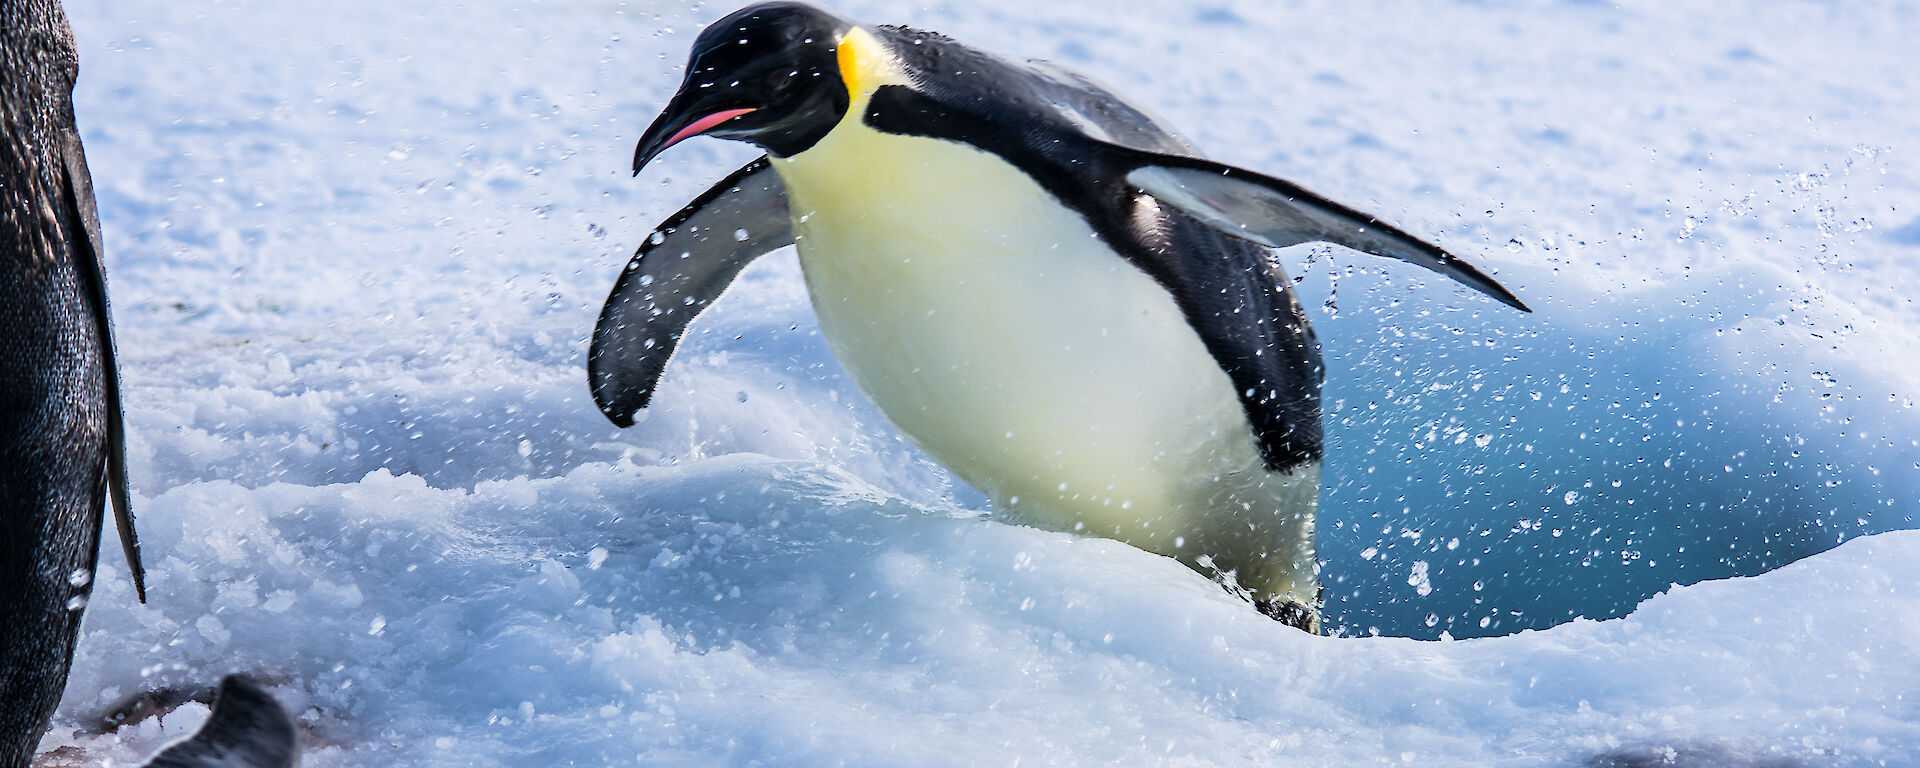 An emperor penguin is photographed in mid-air as it jumps from the water through a hole in the ice